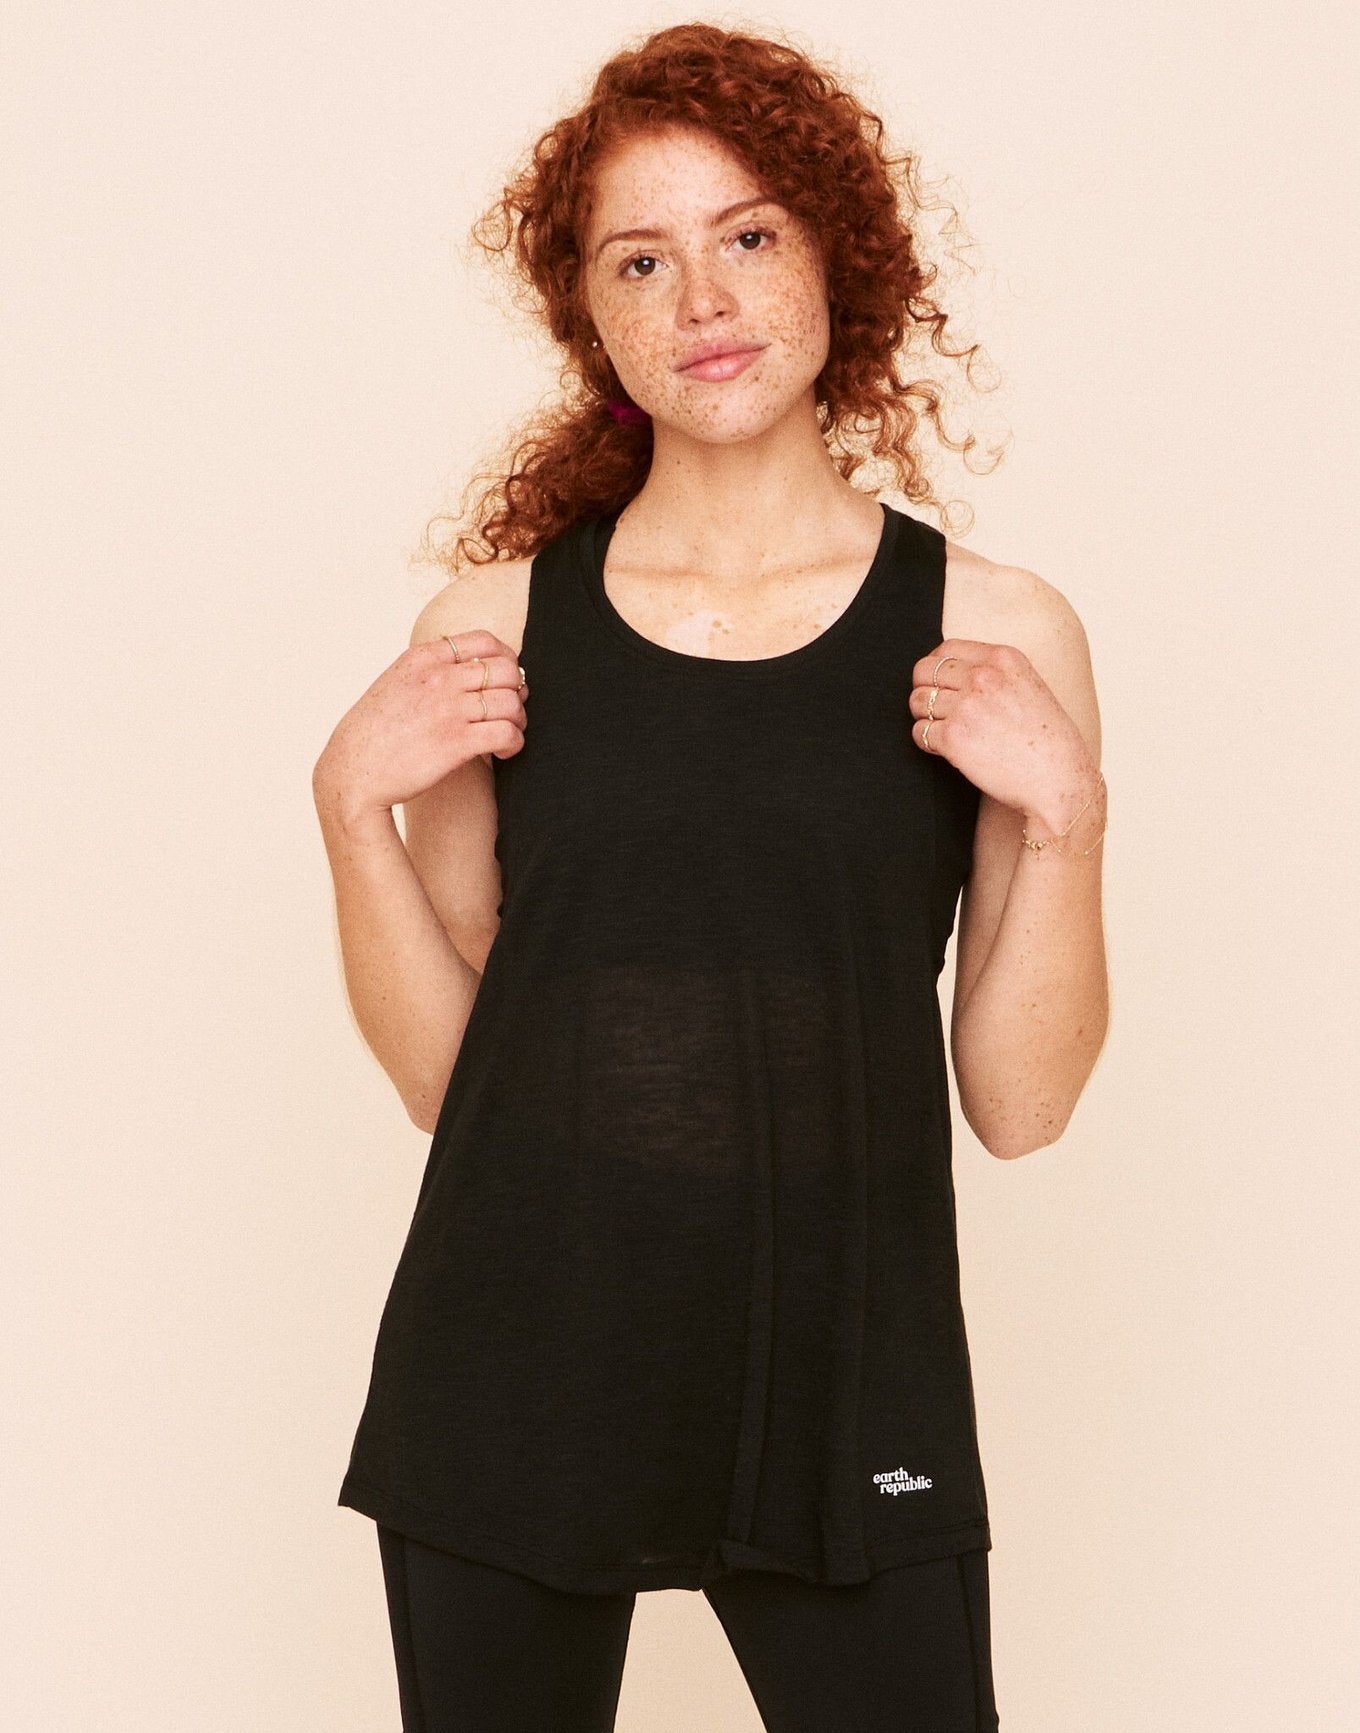 Earth Republic Emmaline Dropped Armhole Tank Workout Tank in color Jet Black and shape tank